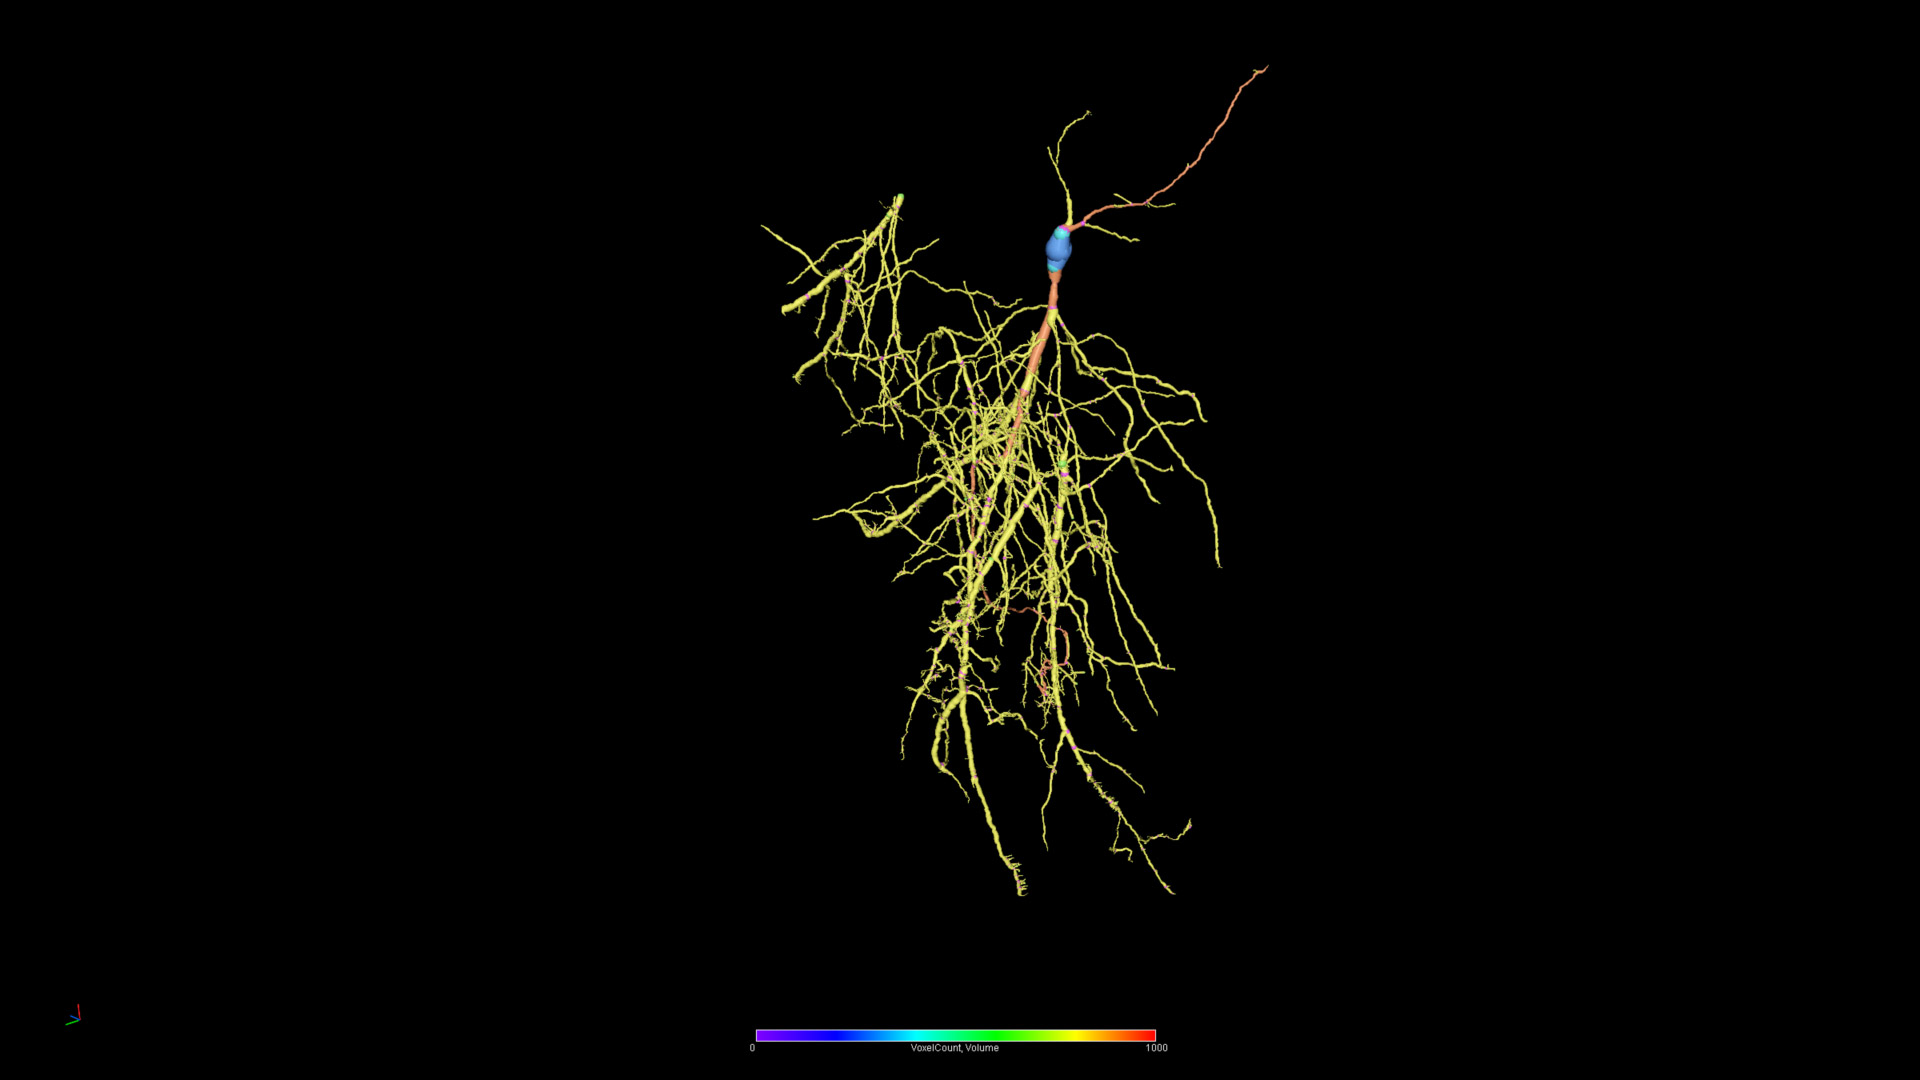 Figure 3: Morphology of individual 3D reconstructed neurons.